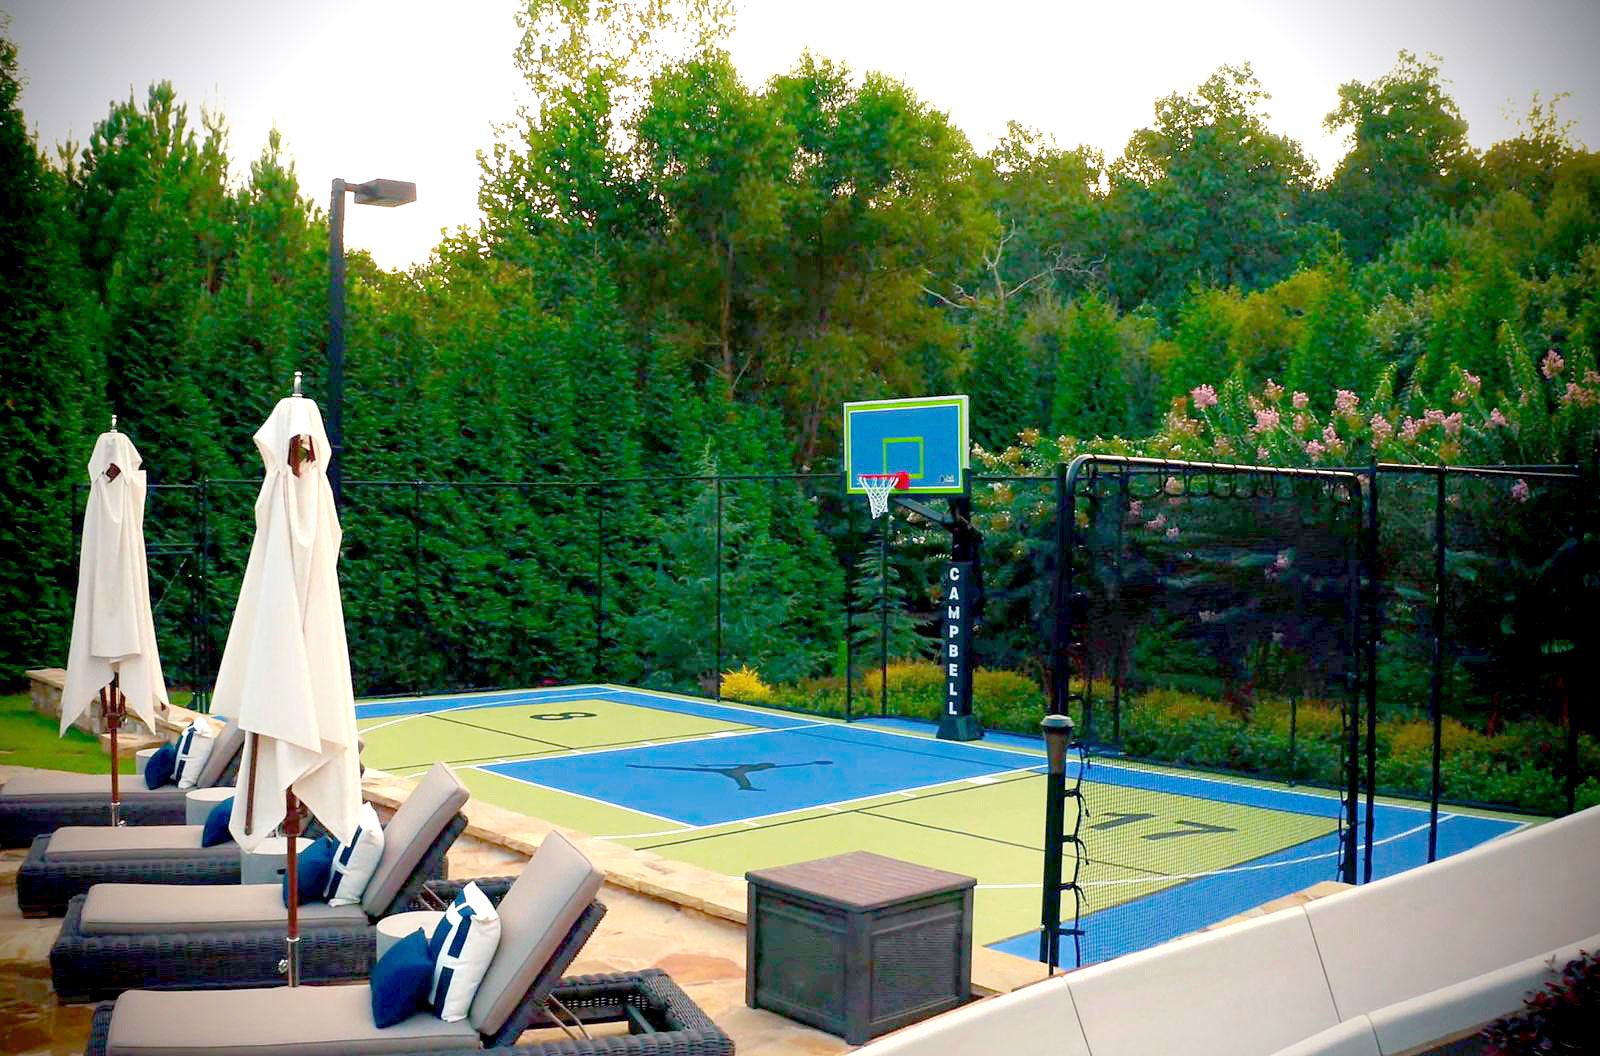 Alternate view of backyard multi-court with fencing, SnapBack, basketball hoop and lighting